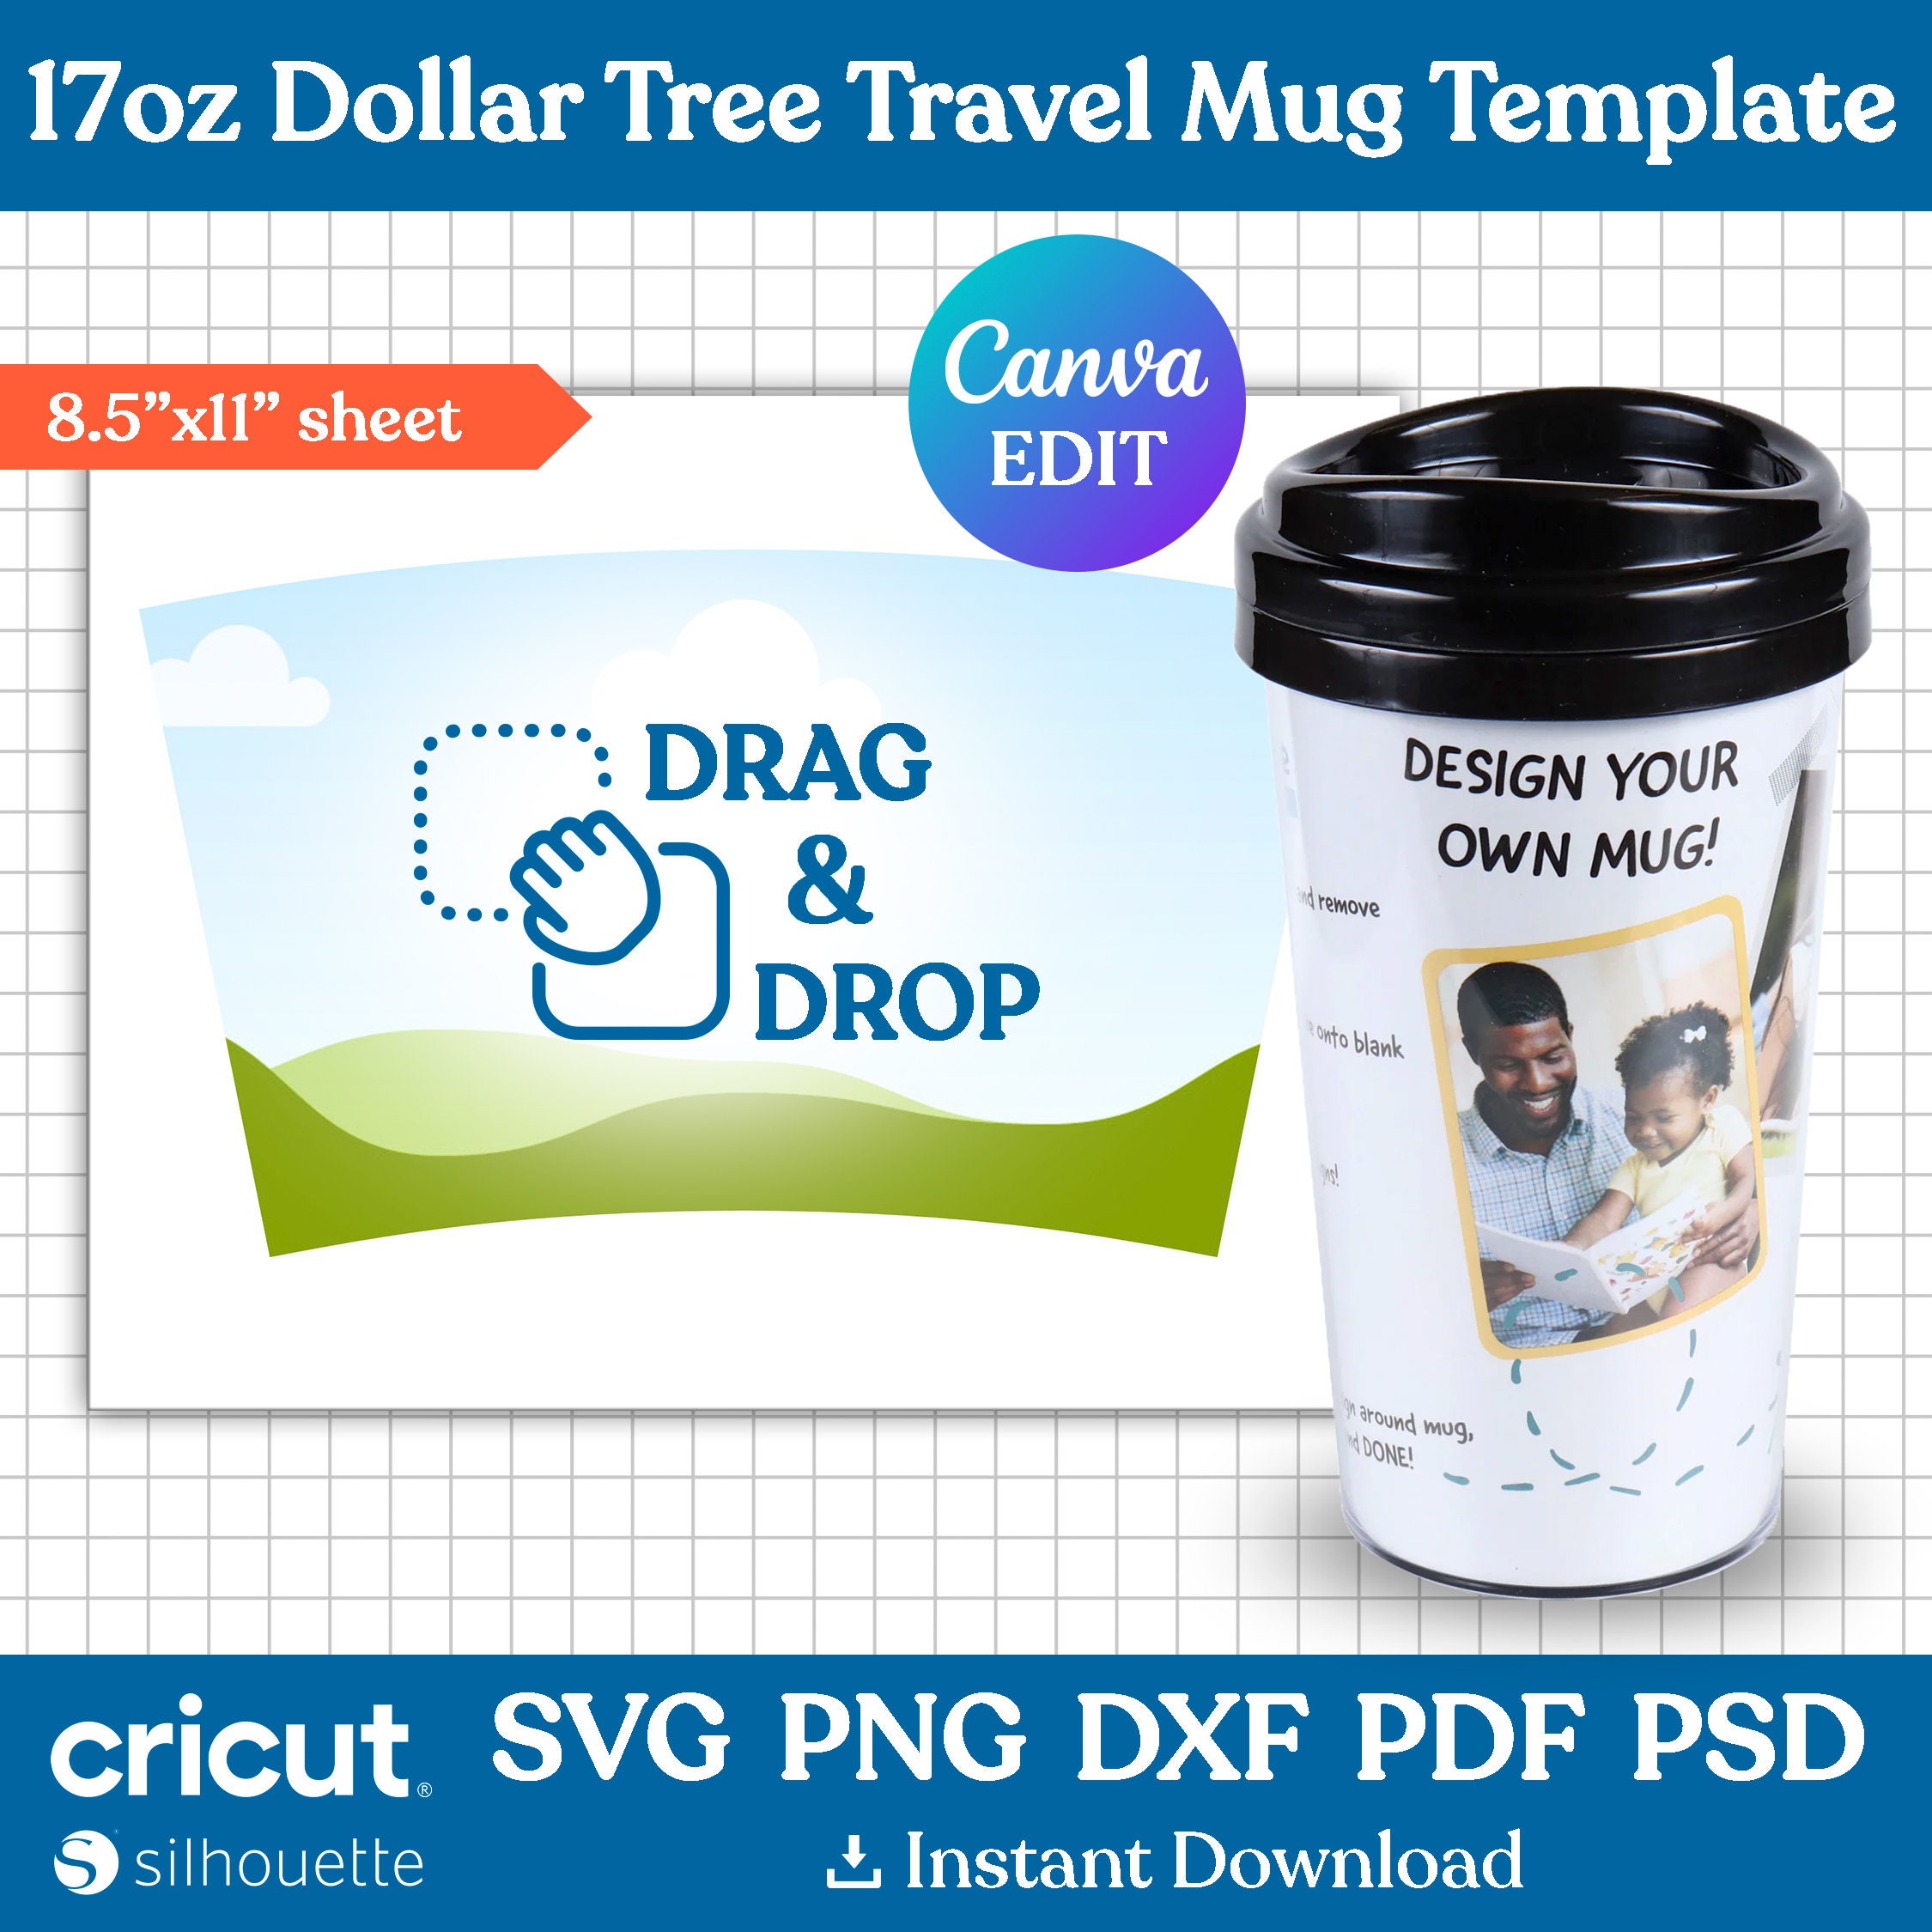 1 piece Stainless Blank Travel Mug white for Sublimation Dye Thermal Heat  Press Transfer Coated 14 ounces